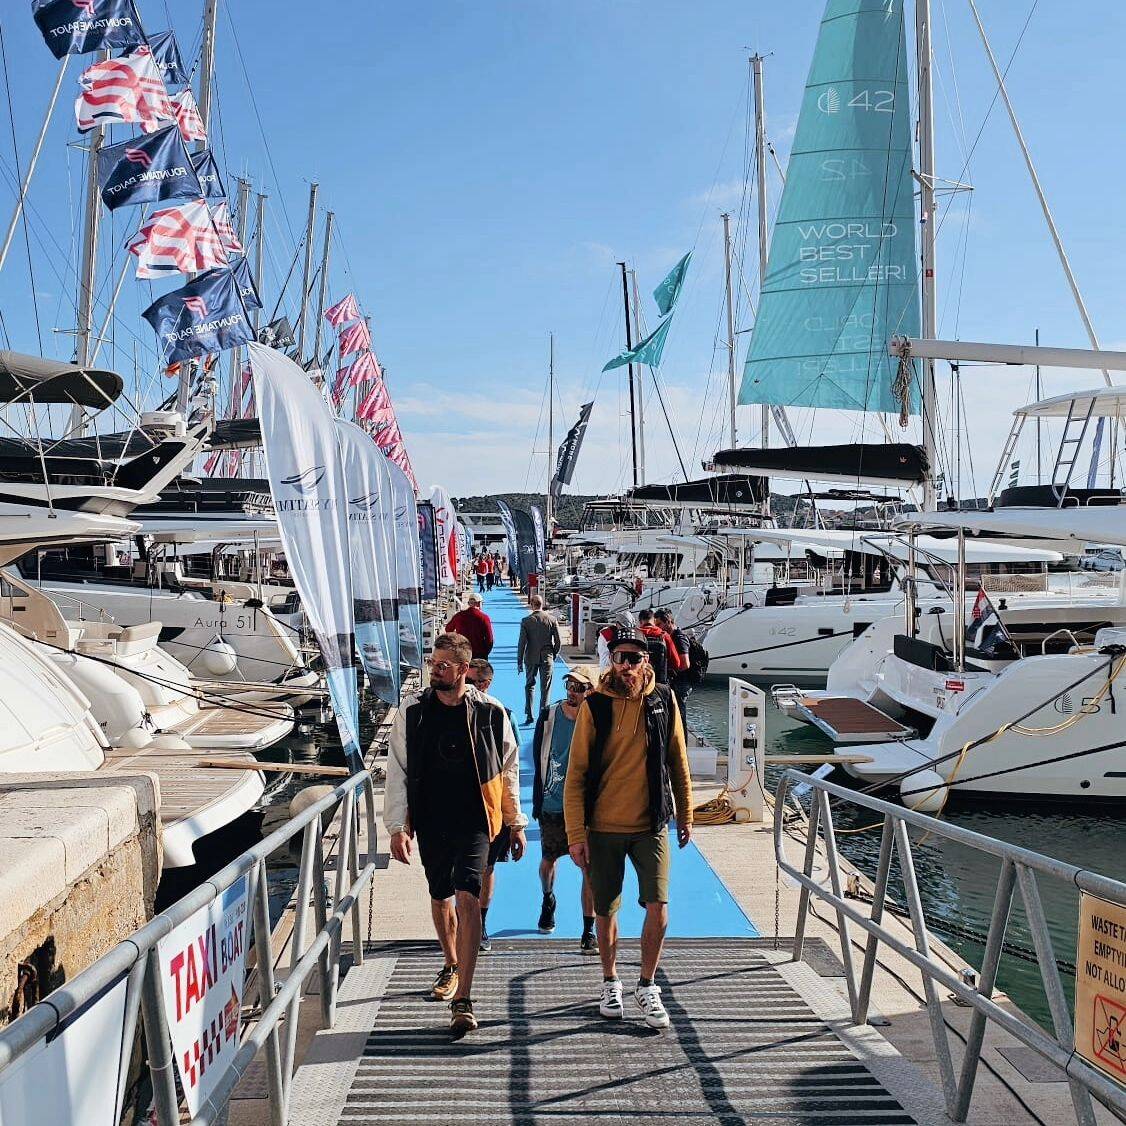 We have visited the Dalmatia Boat Show at Marina Baotić 🌊 

From the tiniest dinghies to luxurious yachts, and sleek motorboats to majestic sailboats and catamarans, the show boasted a spectacular array of vessels, catering to every nautical dreamer 